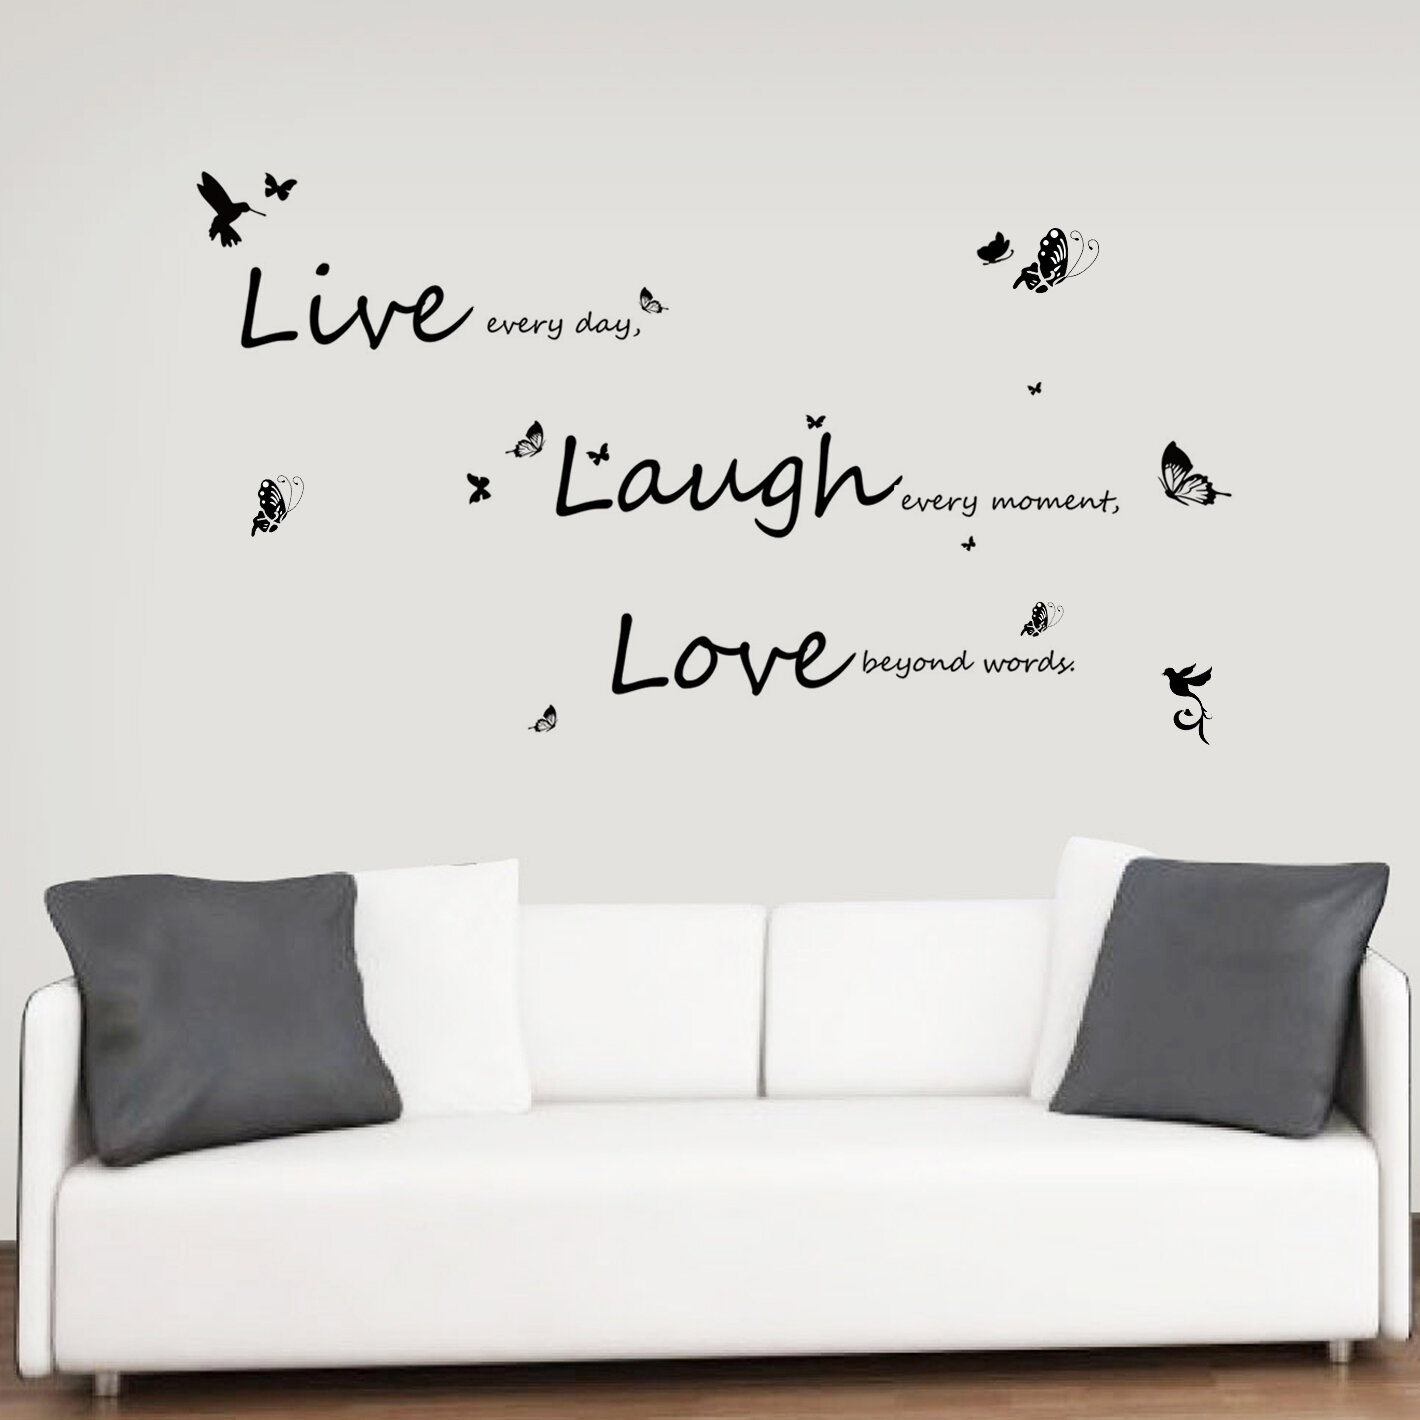 Car Decal Sticker LIVE LAUGH LOVE quote Vinyl Wall Highest Quality